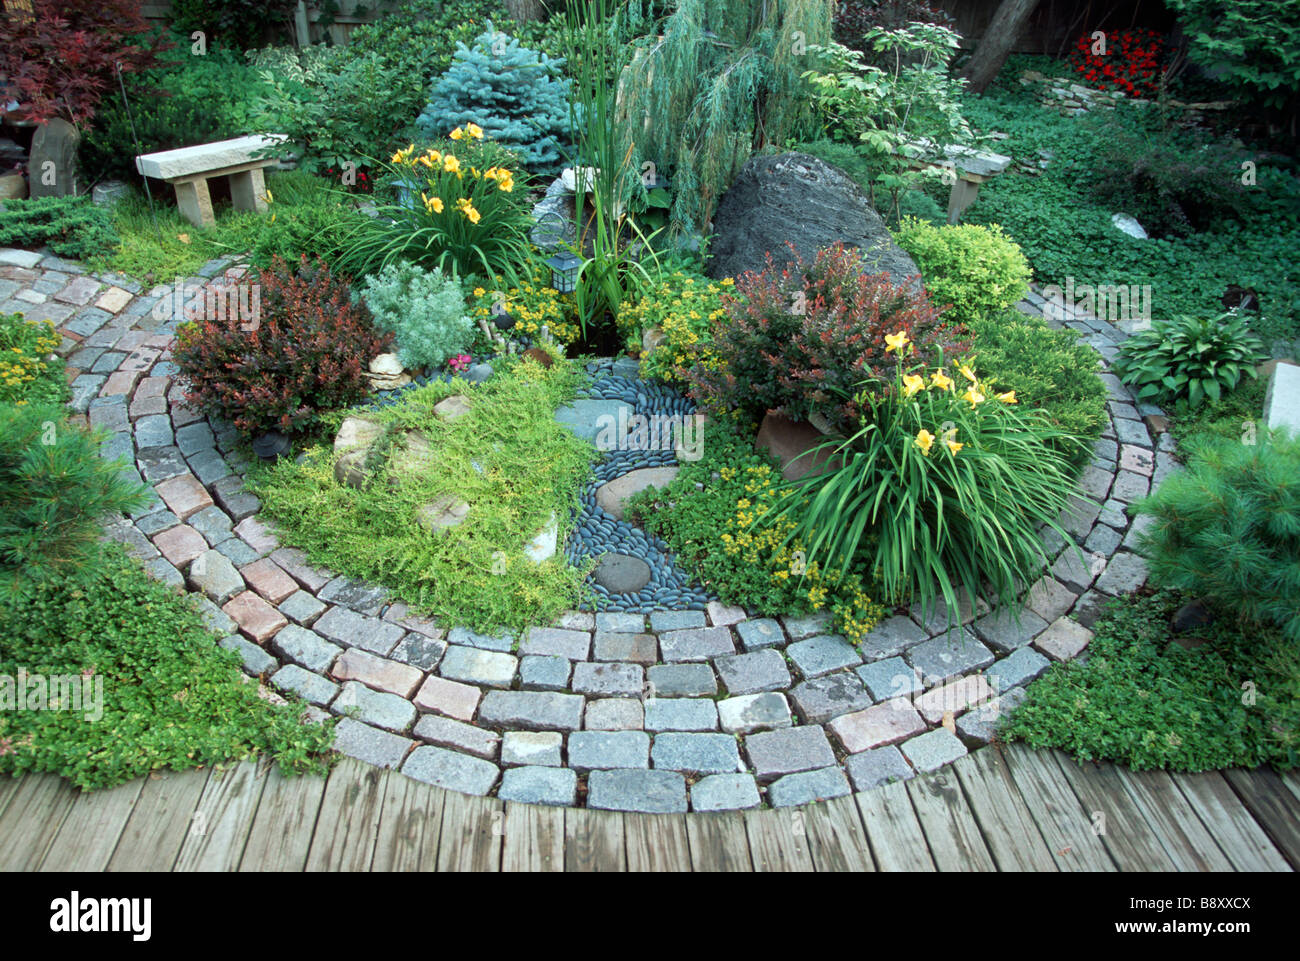 RECYCLED CITY STREET PAVERS AND BRICKS FORM PATTERN IN MINNESOTA PERENNIAL GARDEN.  BARBERRY, LILIES, GROUNDCOVERS AND BENCH. Stock Photo